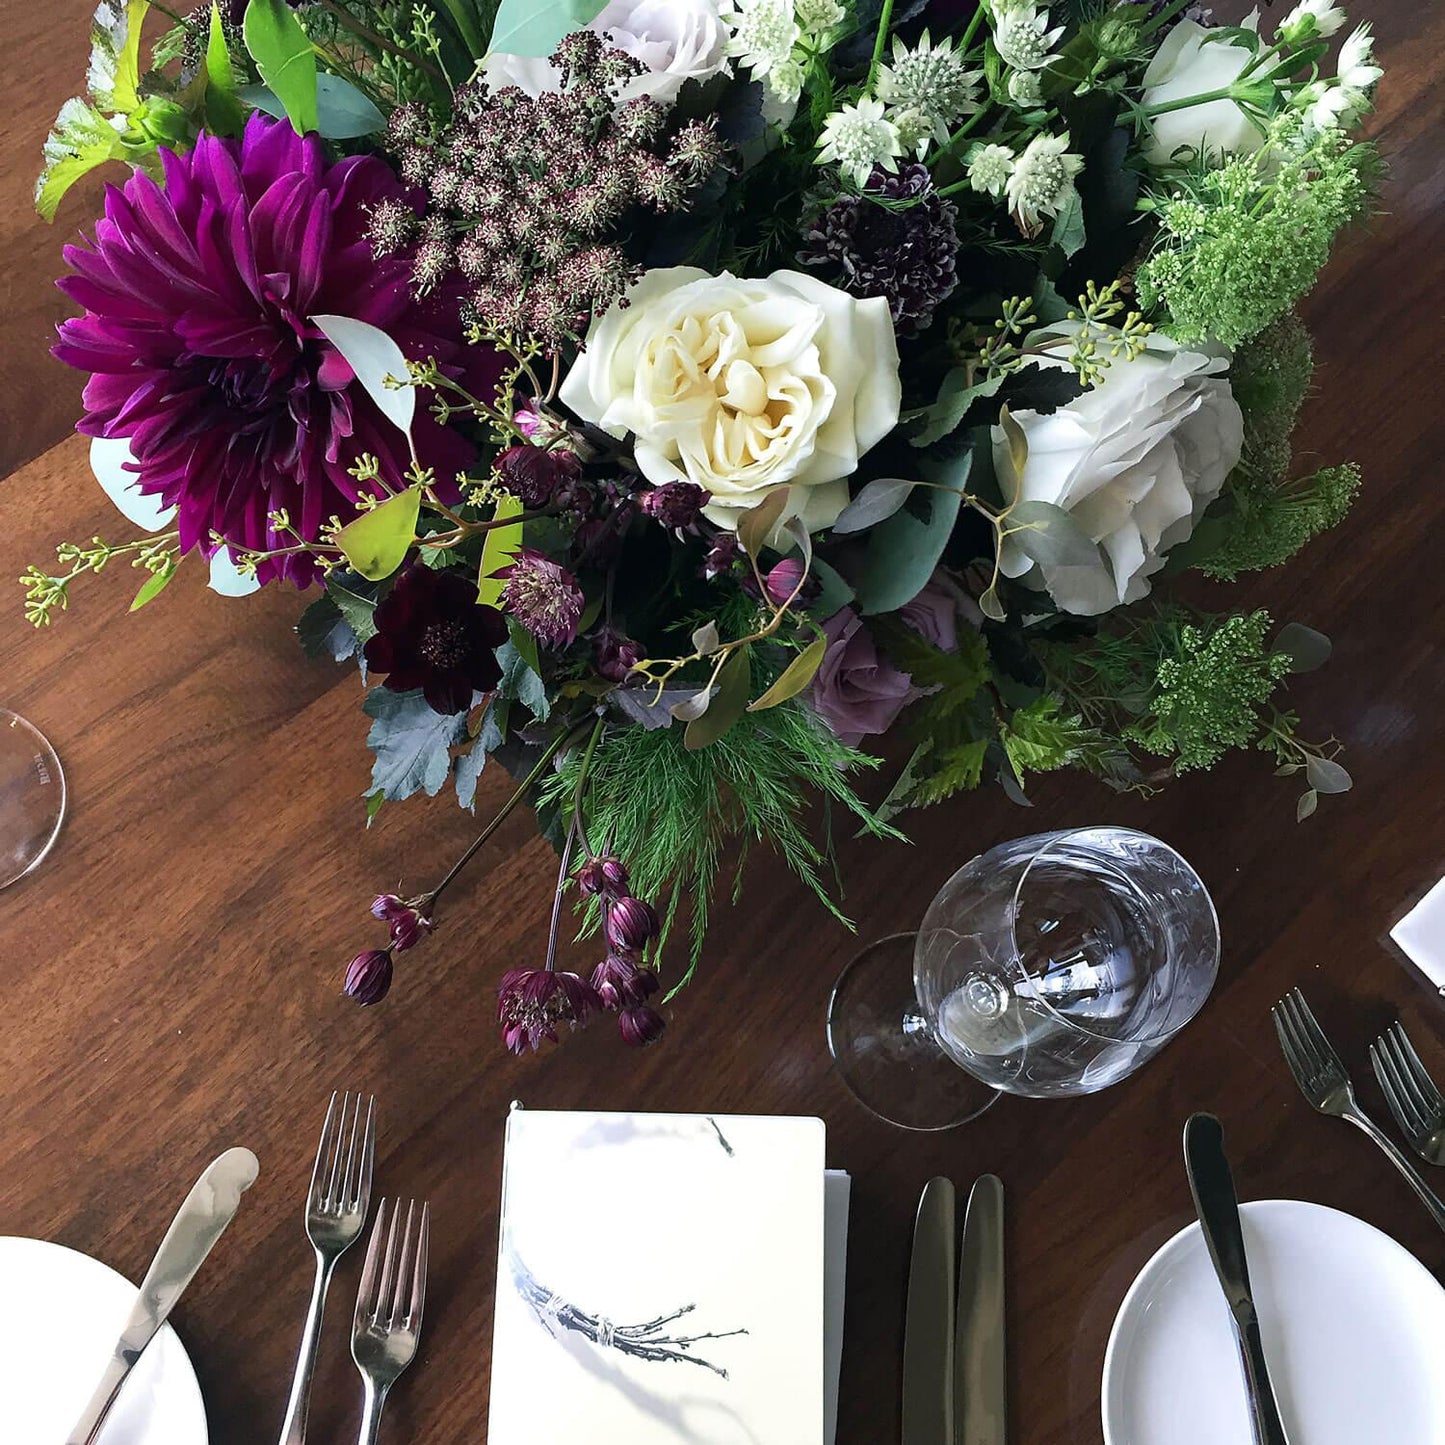 A beautifully arranged bouquet of white, pink, and deep purple flowers accompanied by lush greenery sits in a grey vase on a table set with clear glassware, against the backdrop of an elegant room where guests gather around.  Order online for wedding & event flowers from the best florist in Toronto near you.